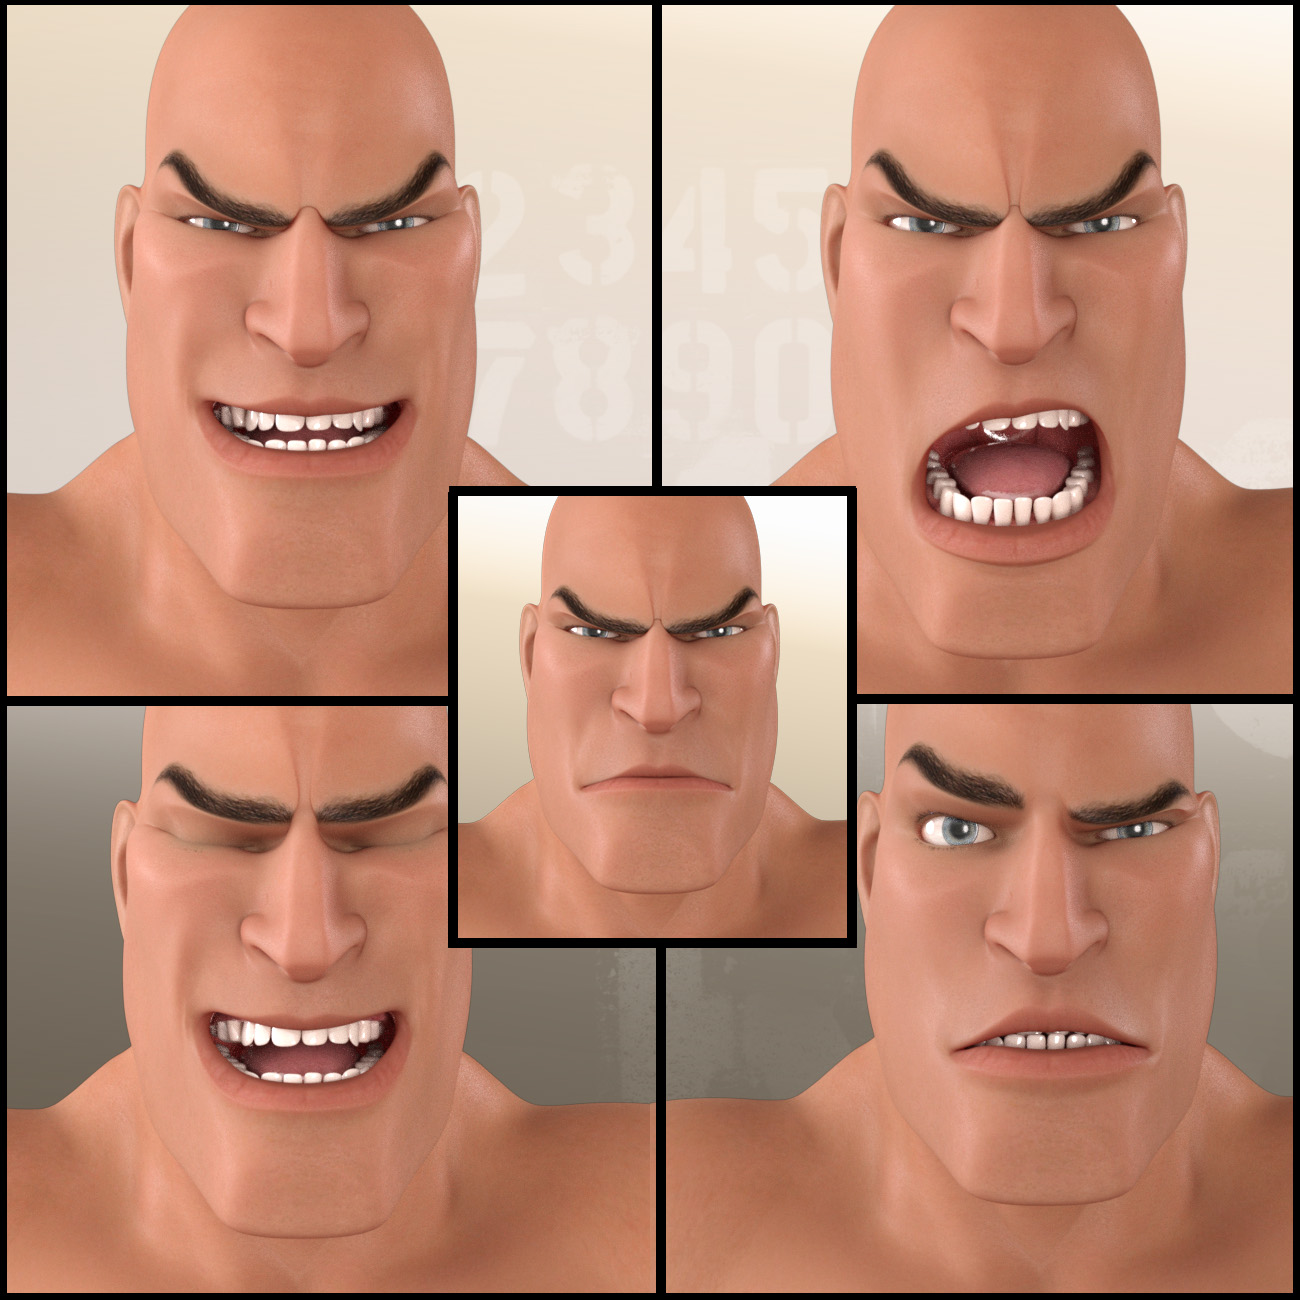 Z Almighty Powers - Poses and Expressions for Toon Dwayne 8 and Genesis 8 Male by: Zeddicuss, 3D Models by Daz 3D